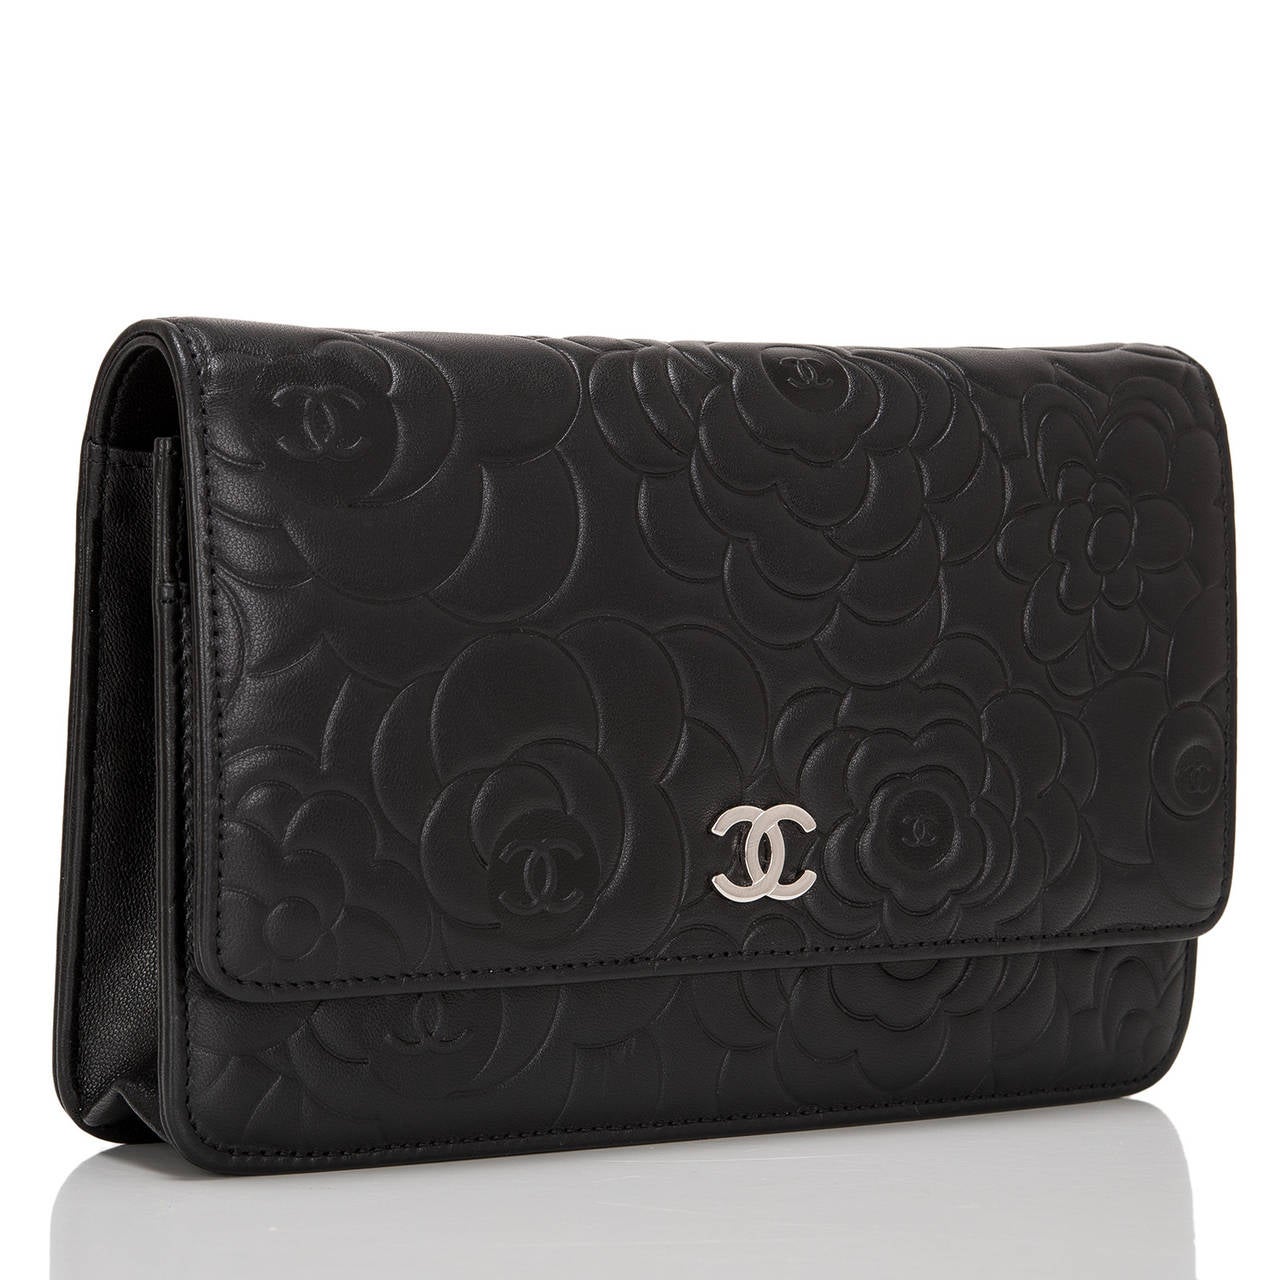 This black Camellia Wallet on Chain (WOC) of lambskin leather with silver tone hardware features an embossed camellia flower pattern, front flap with CC charm and hidden snap closure, smooth expandable black leather sides and bottom and interwoven